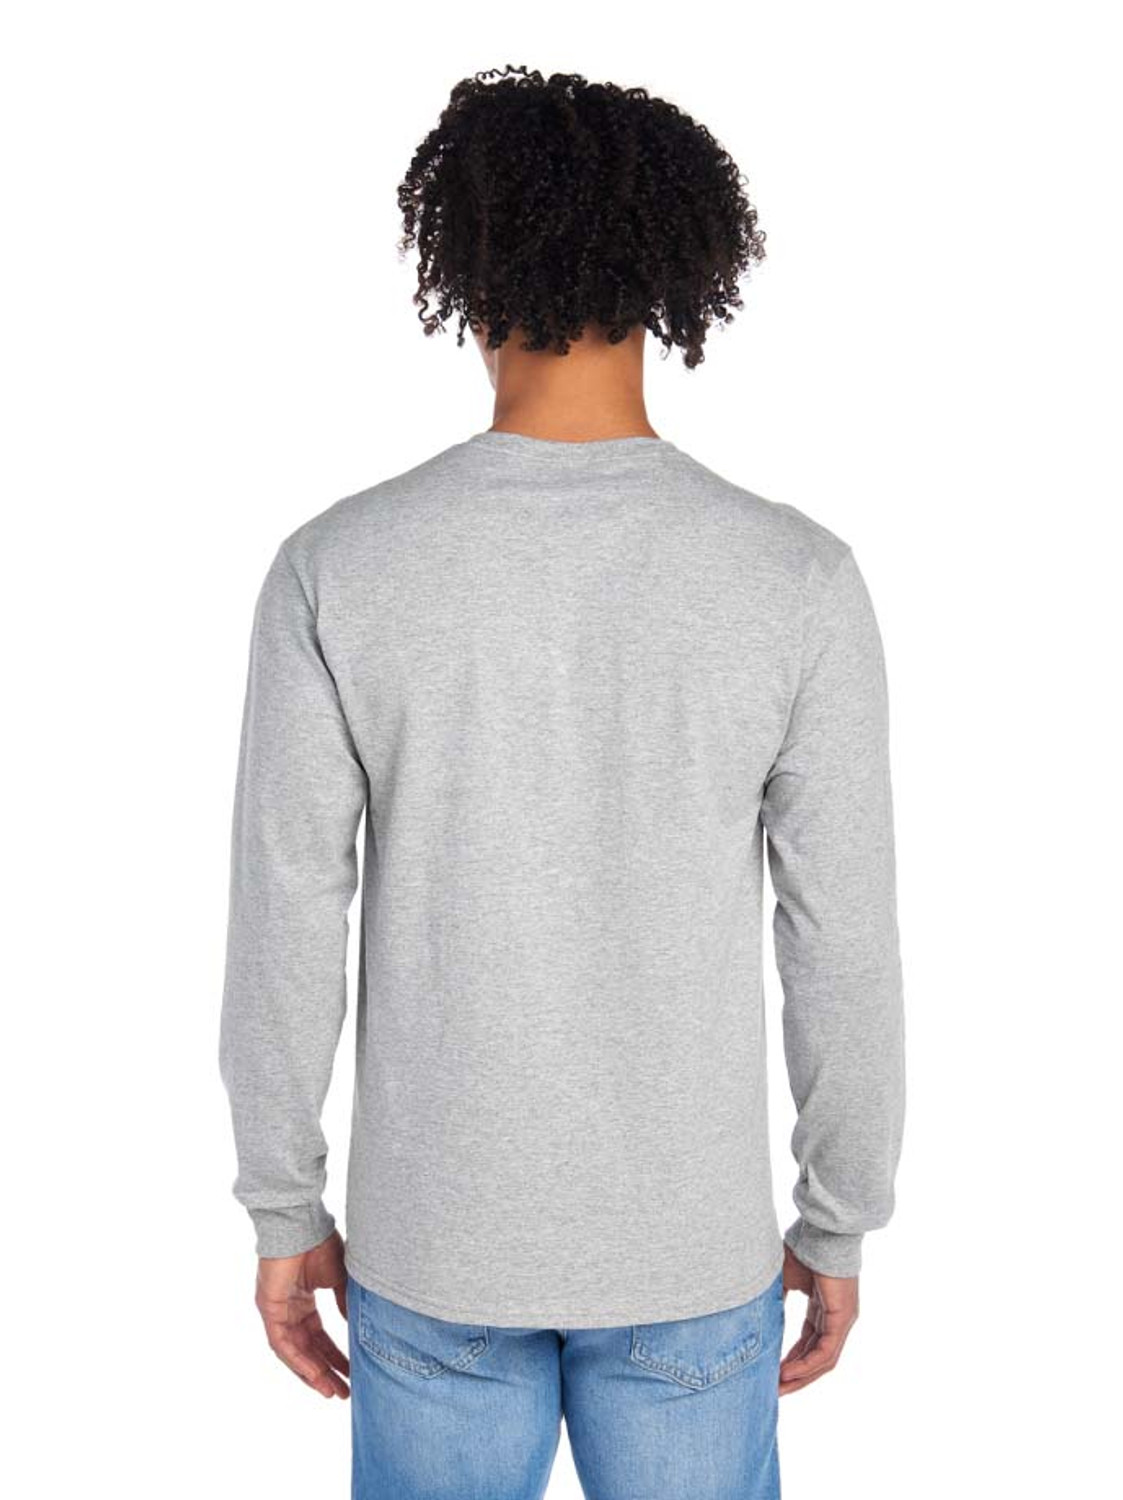 Fruit of the Loom 4930 100% Heavy Cotton™ Long-Sleeve T-Shirt